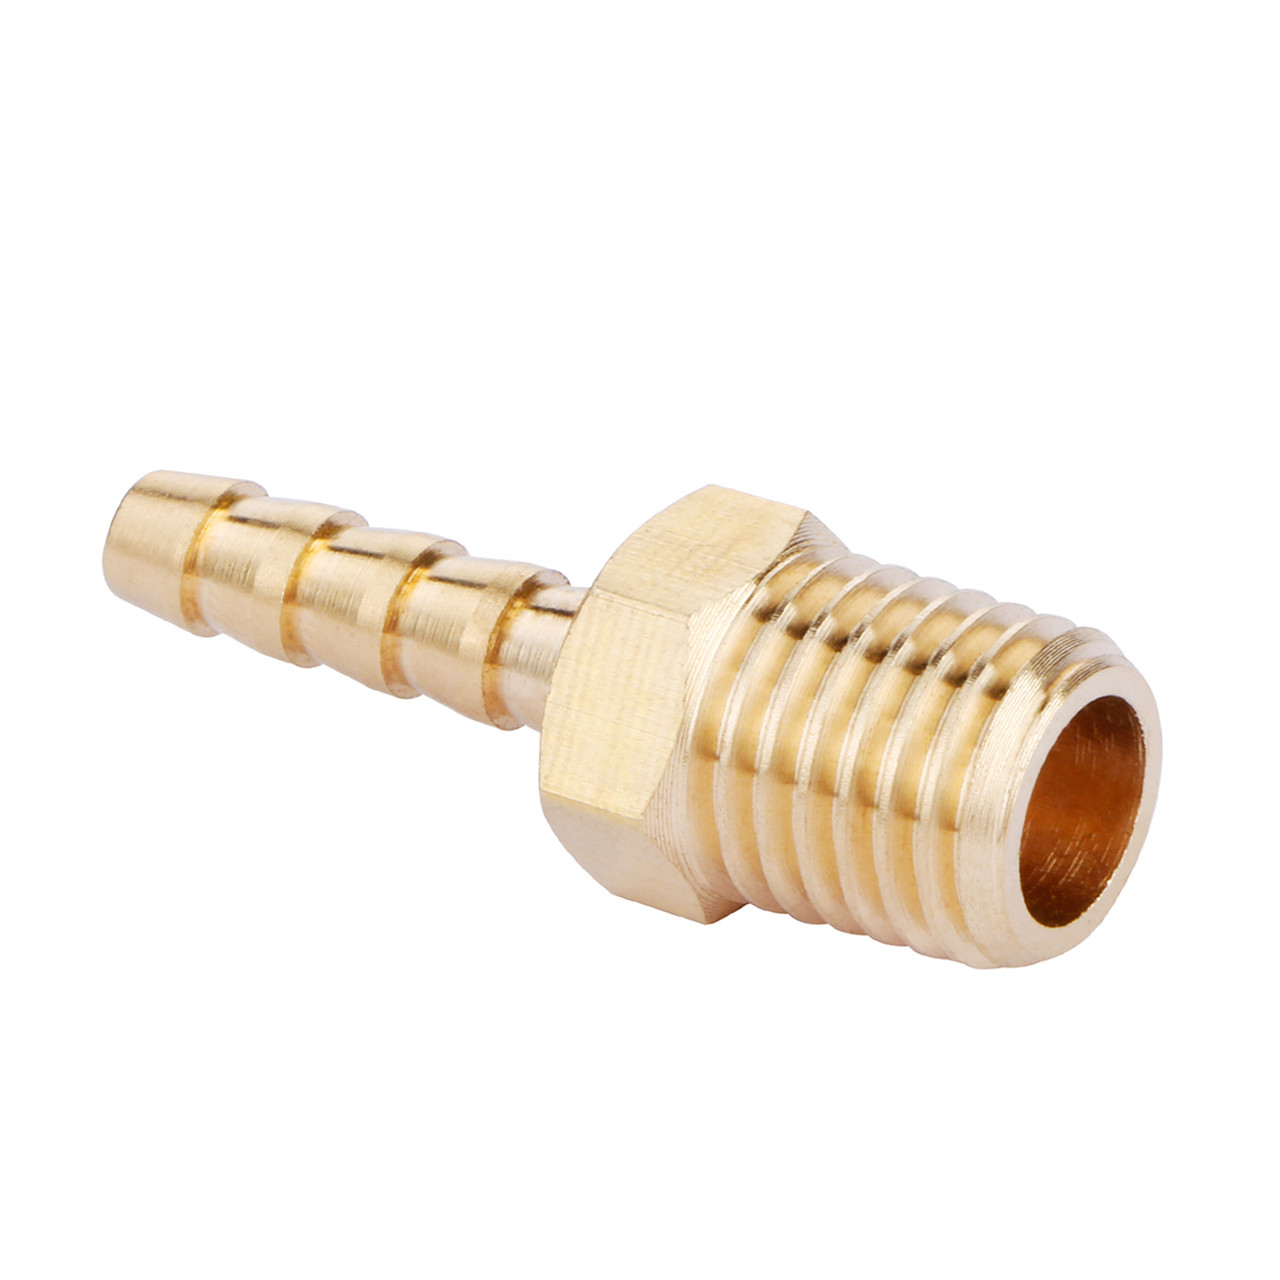 U.S. Solid Brass Hose Fitting, Adapter, 1/4 Barb x 1/8 NPT Male Pipe  Fitting, 1/4x 1/4, 3/8 x 1/4, 3/8x 3/8,1/2x 1/2, 3/4x 3/4 - U.S.  Solid